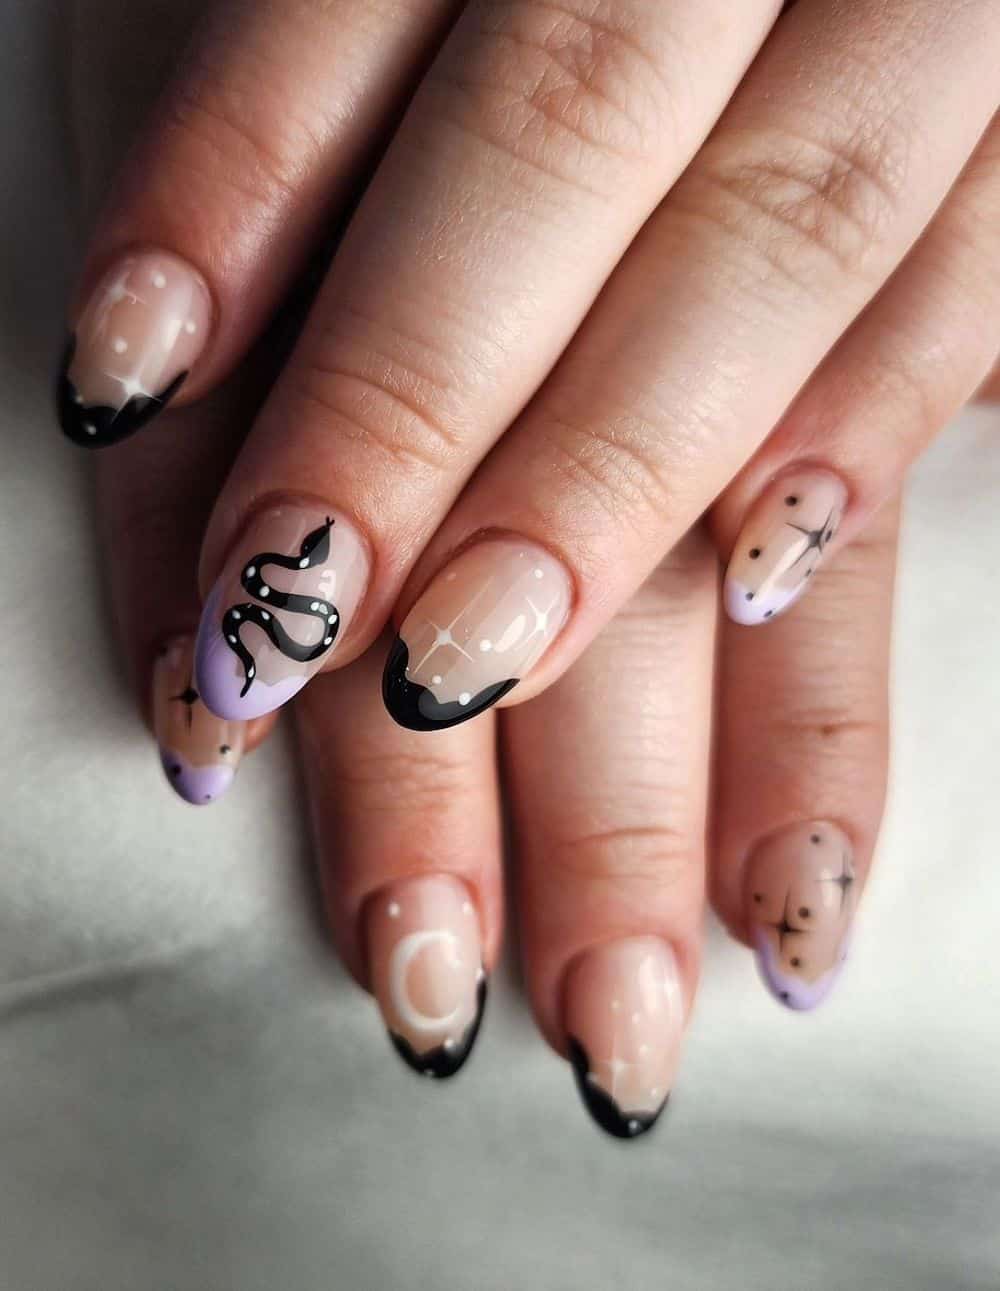 short nude almond nails with wavy pastel purple and black tips, featuring stars, moons, and snake nail art